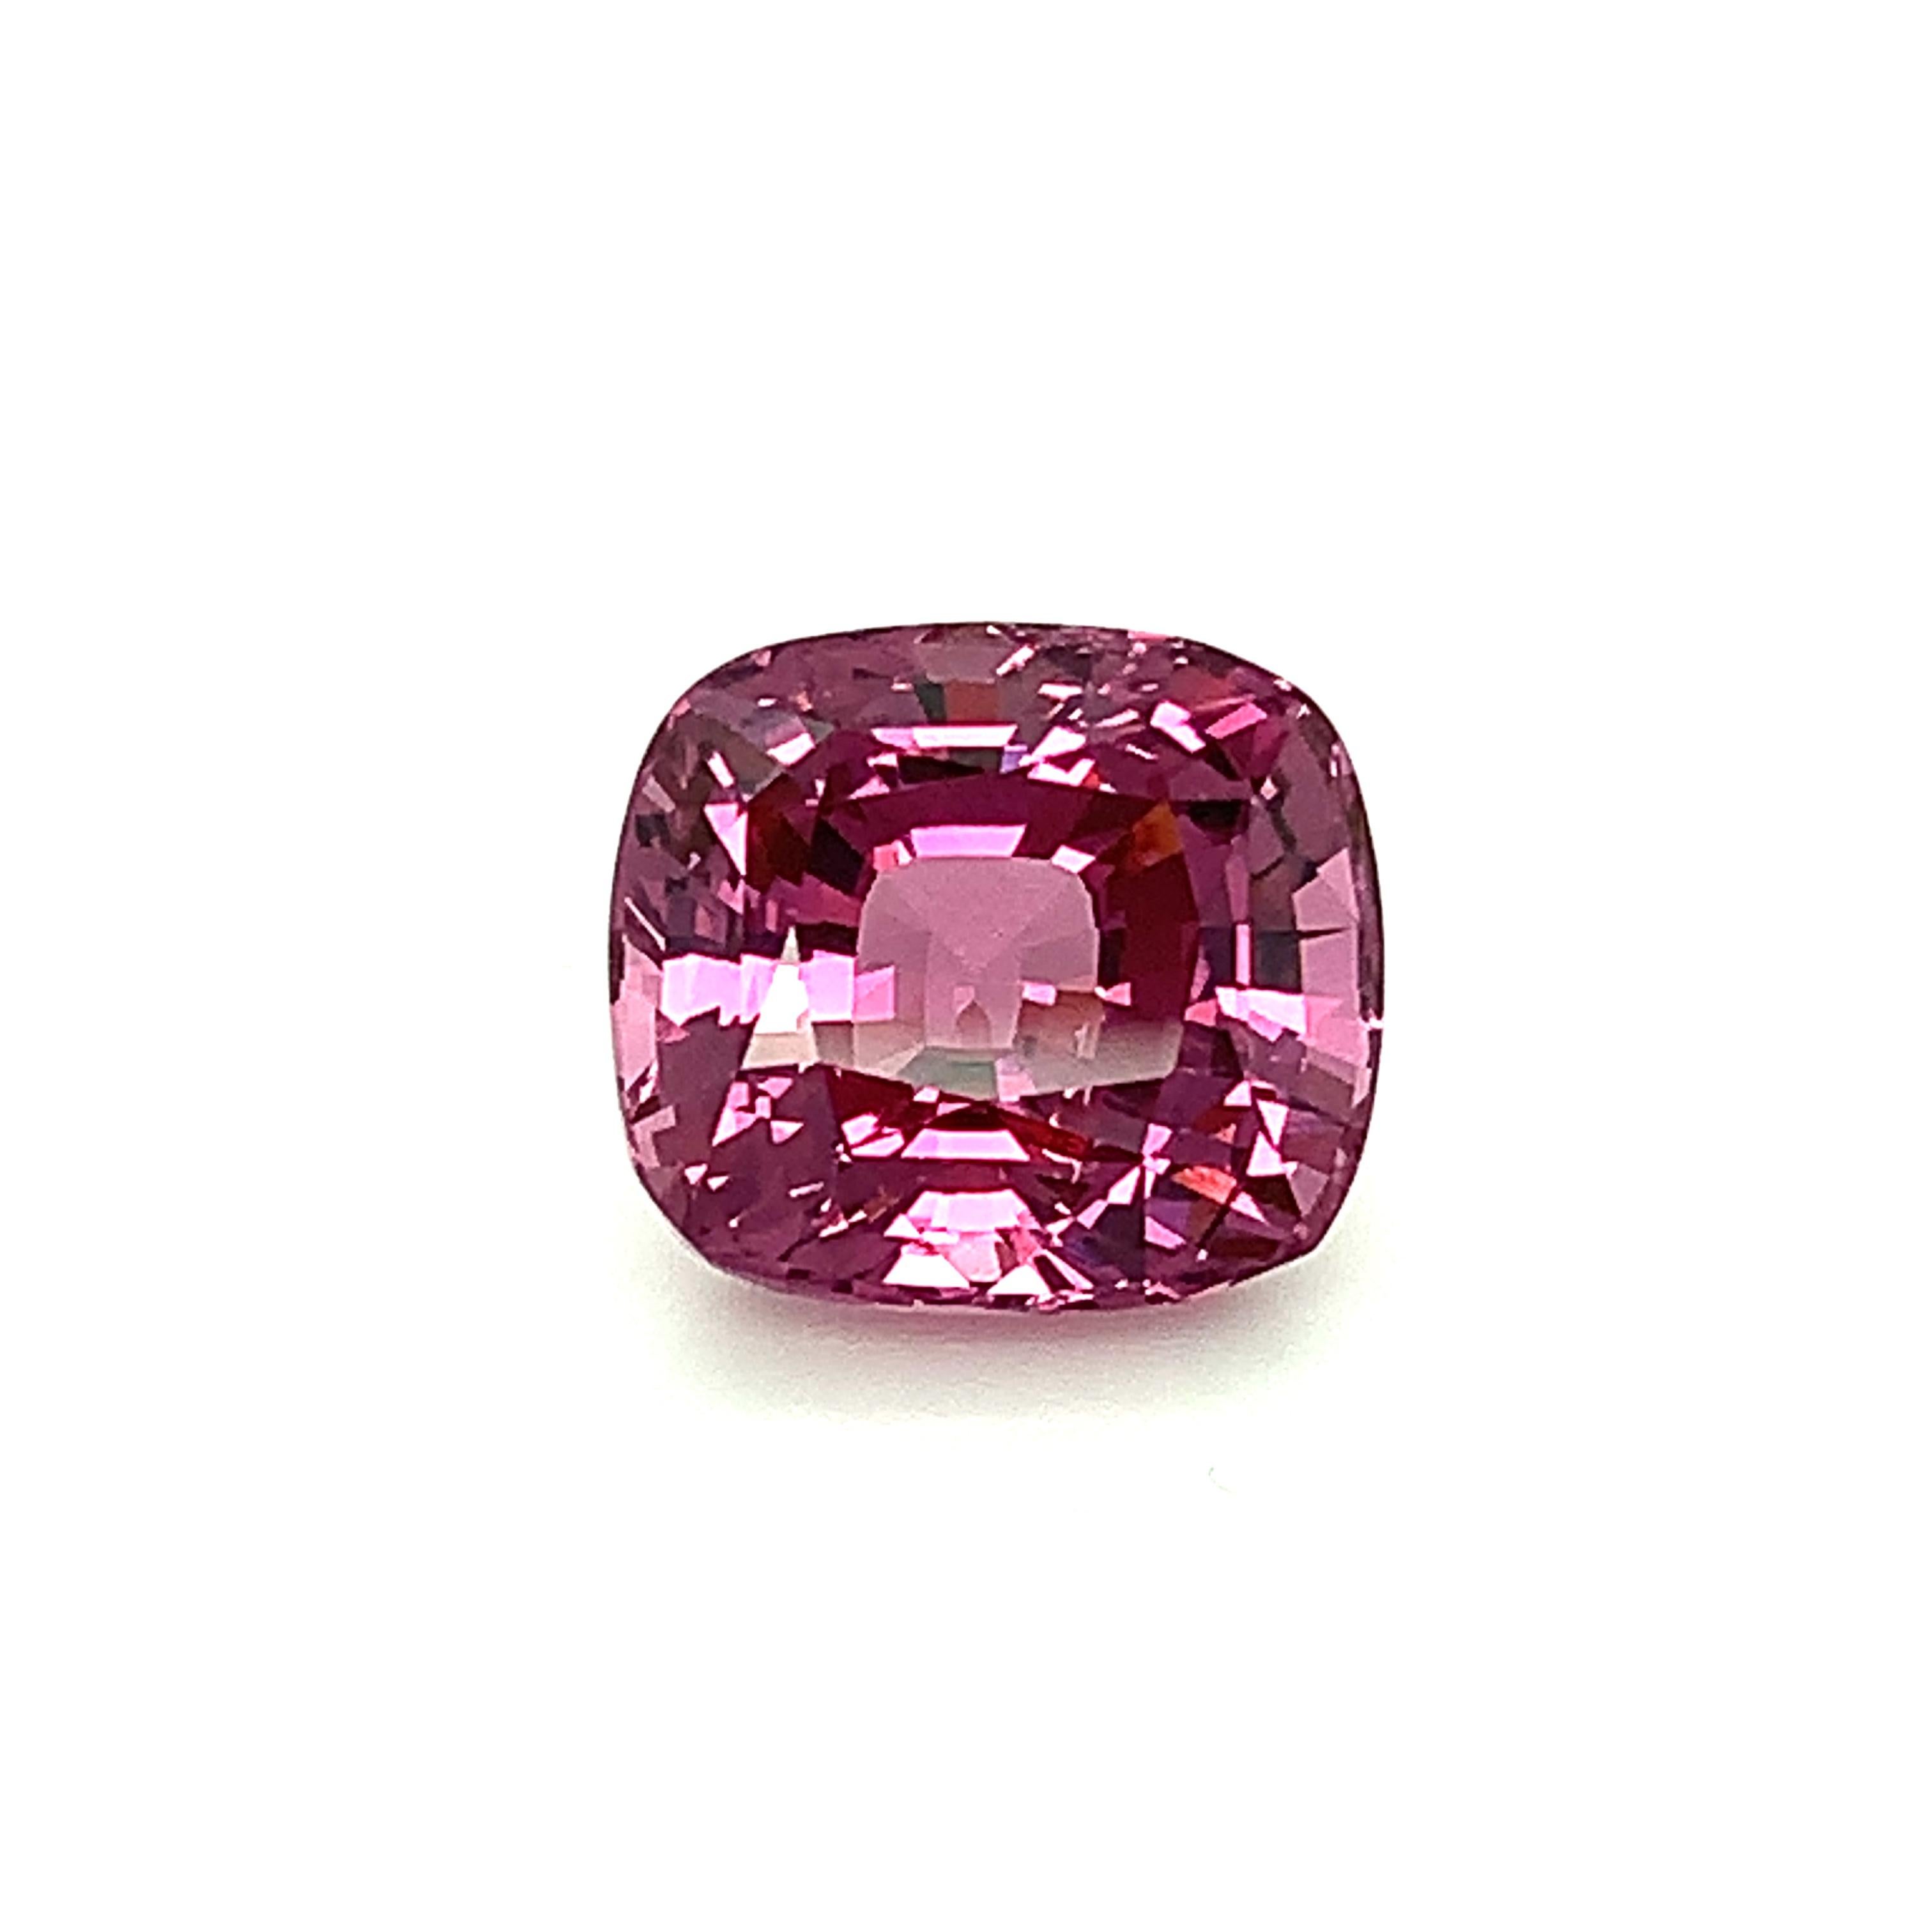 Unheated 10.21 Carat Pink Purple Spinel, Loose Gemstone, GIA Certified ...A In New Condition For Sale In Los Angeles, CA